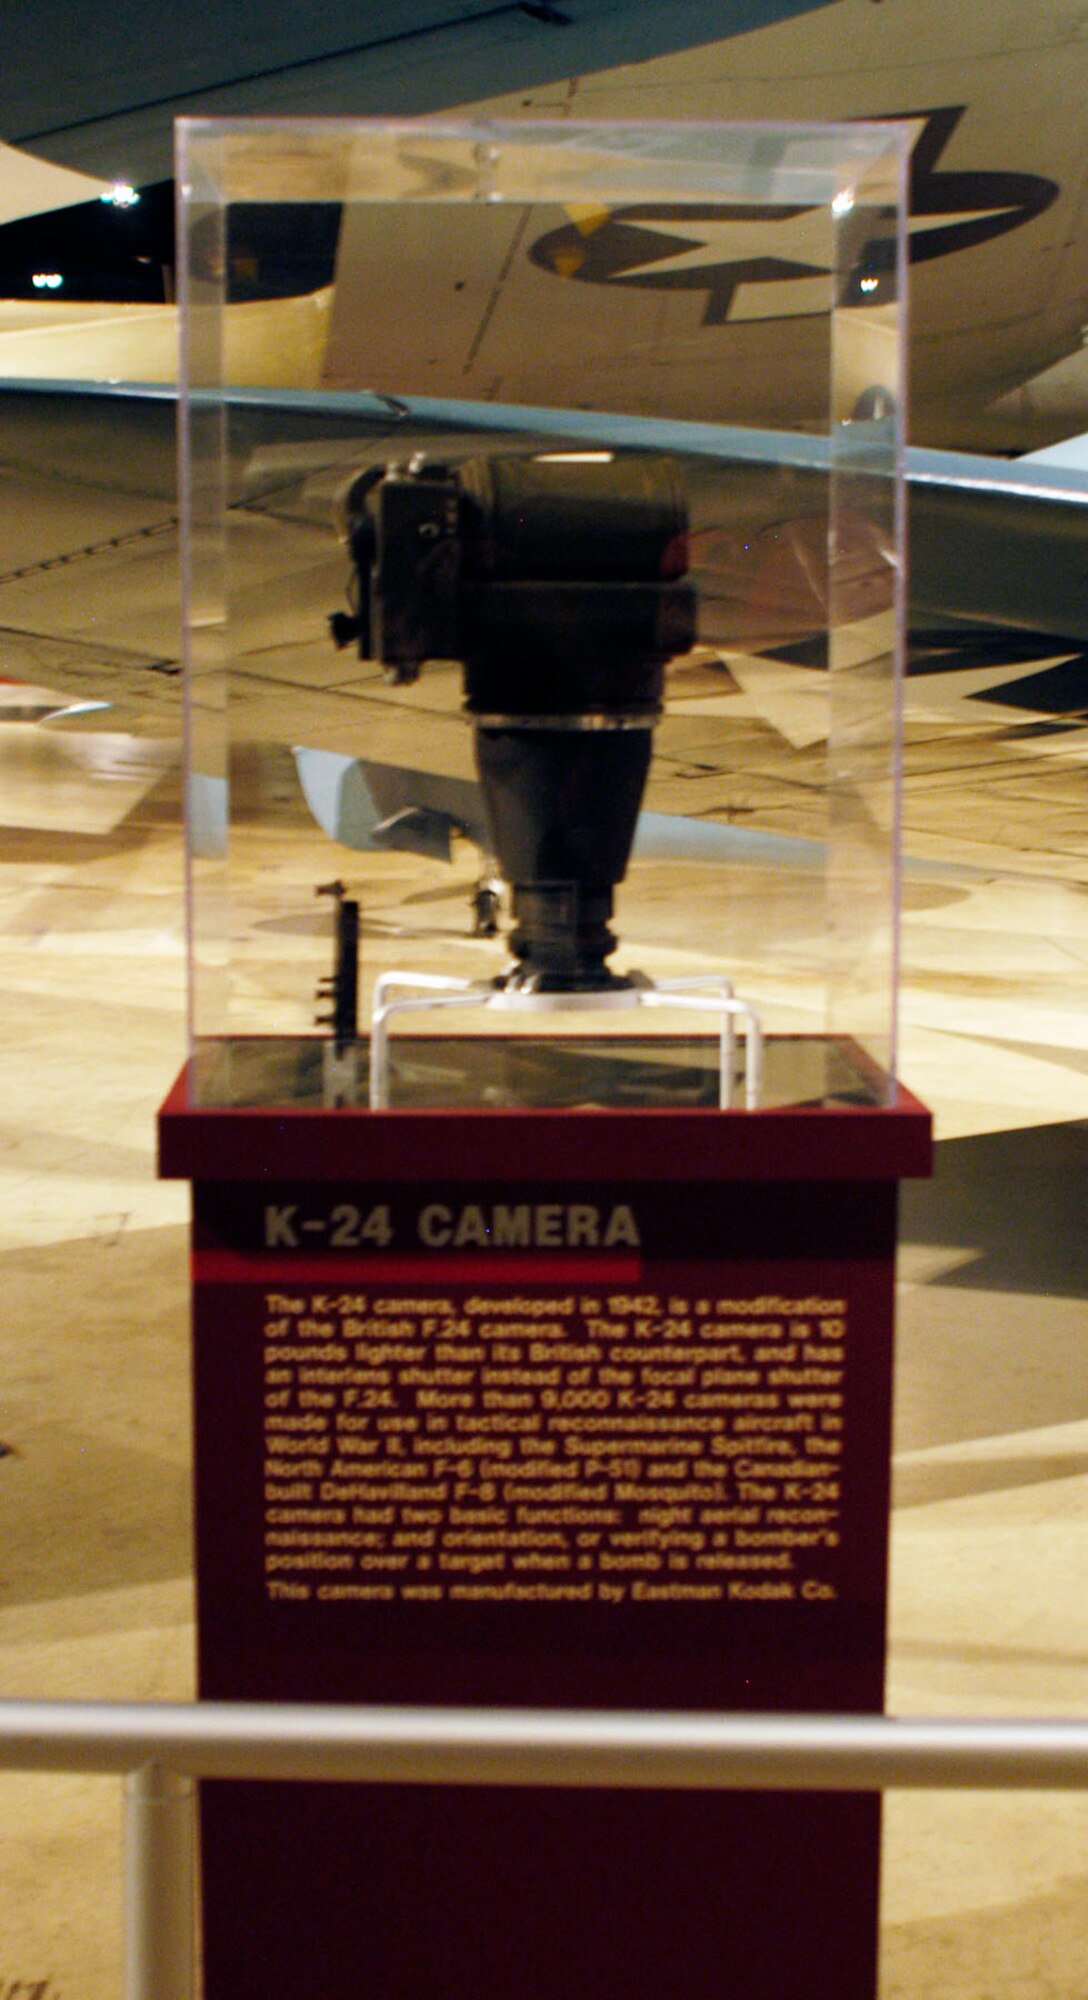 DAYTON, Ohio -- K-24 camera in the World War II Gallery at the National Museum of the U.S. Air Force. (U.S. Air Force photo)